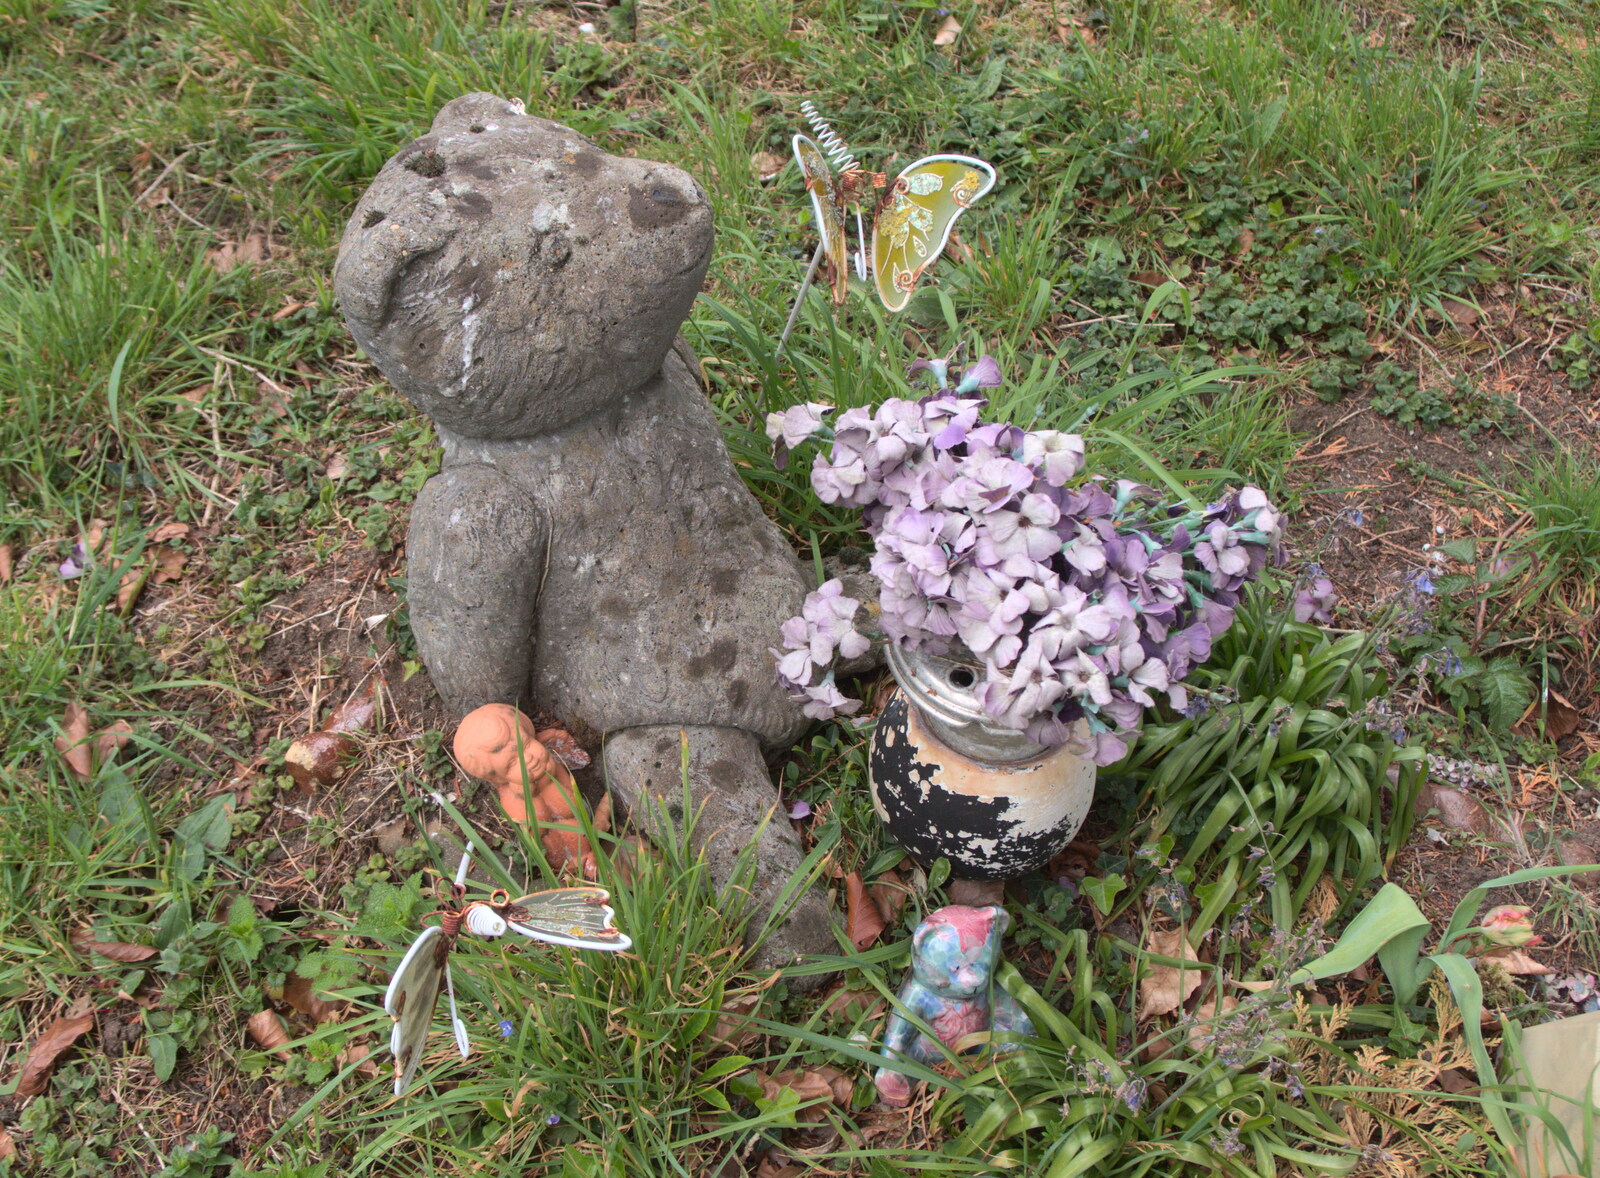 A poignant stone teddy bear and flowers from The Old Brickworks and a New Road, Hoxne and Eye, Suffolk - 26th May 2020